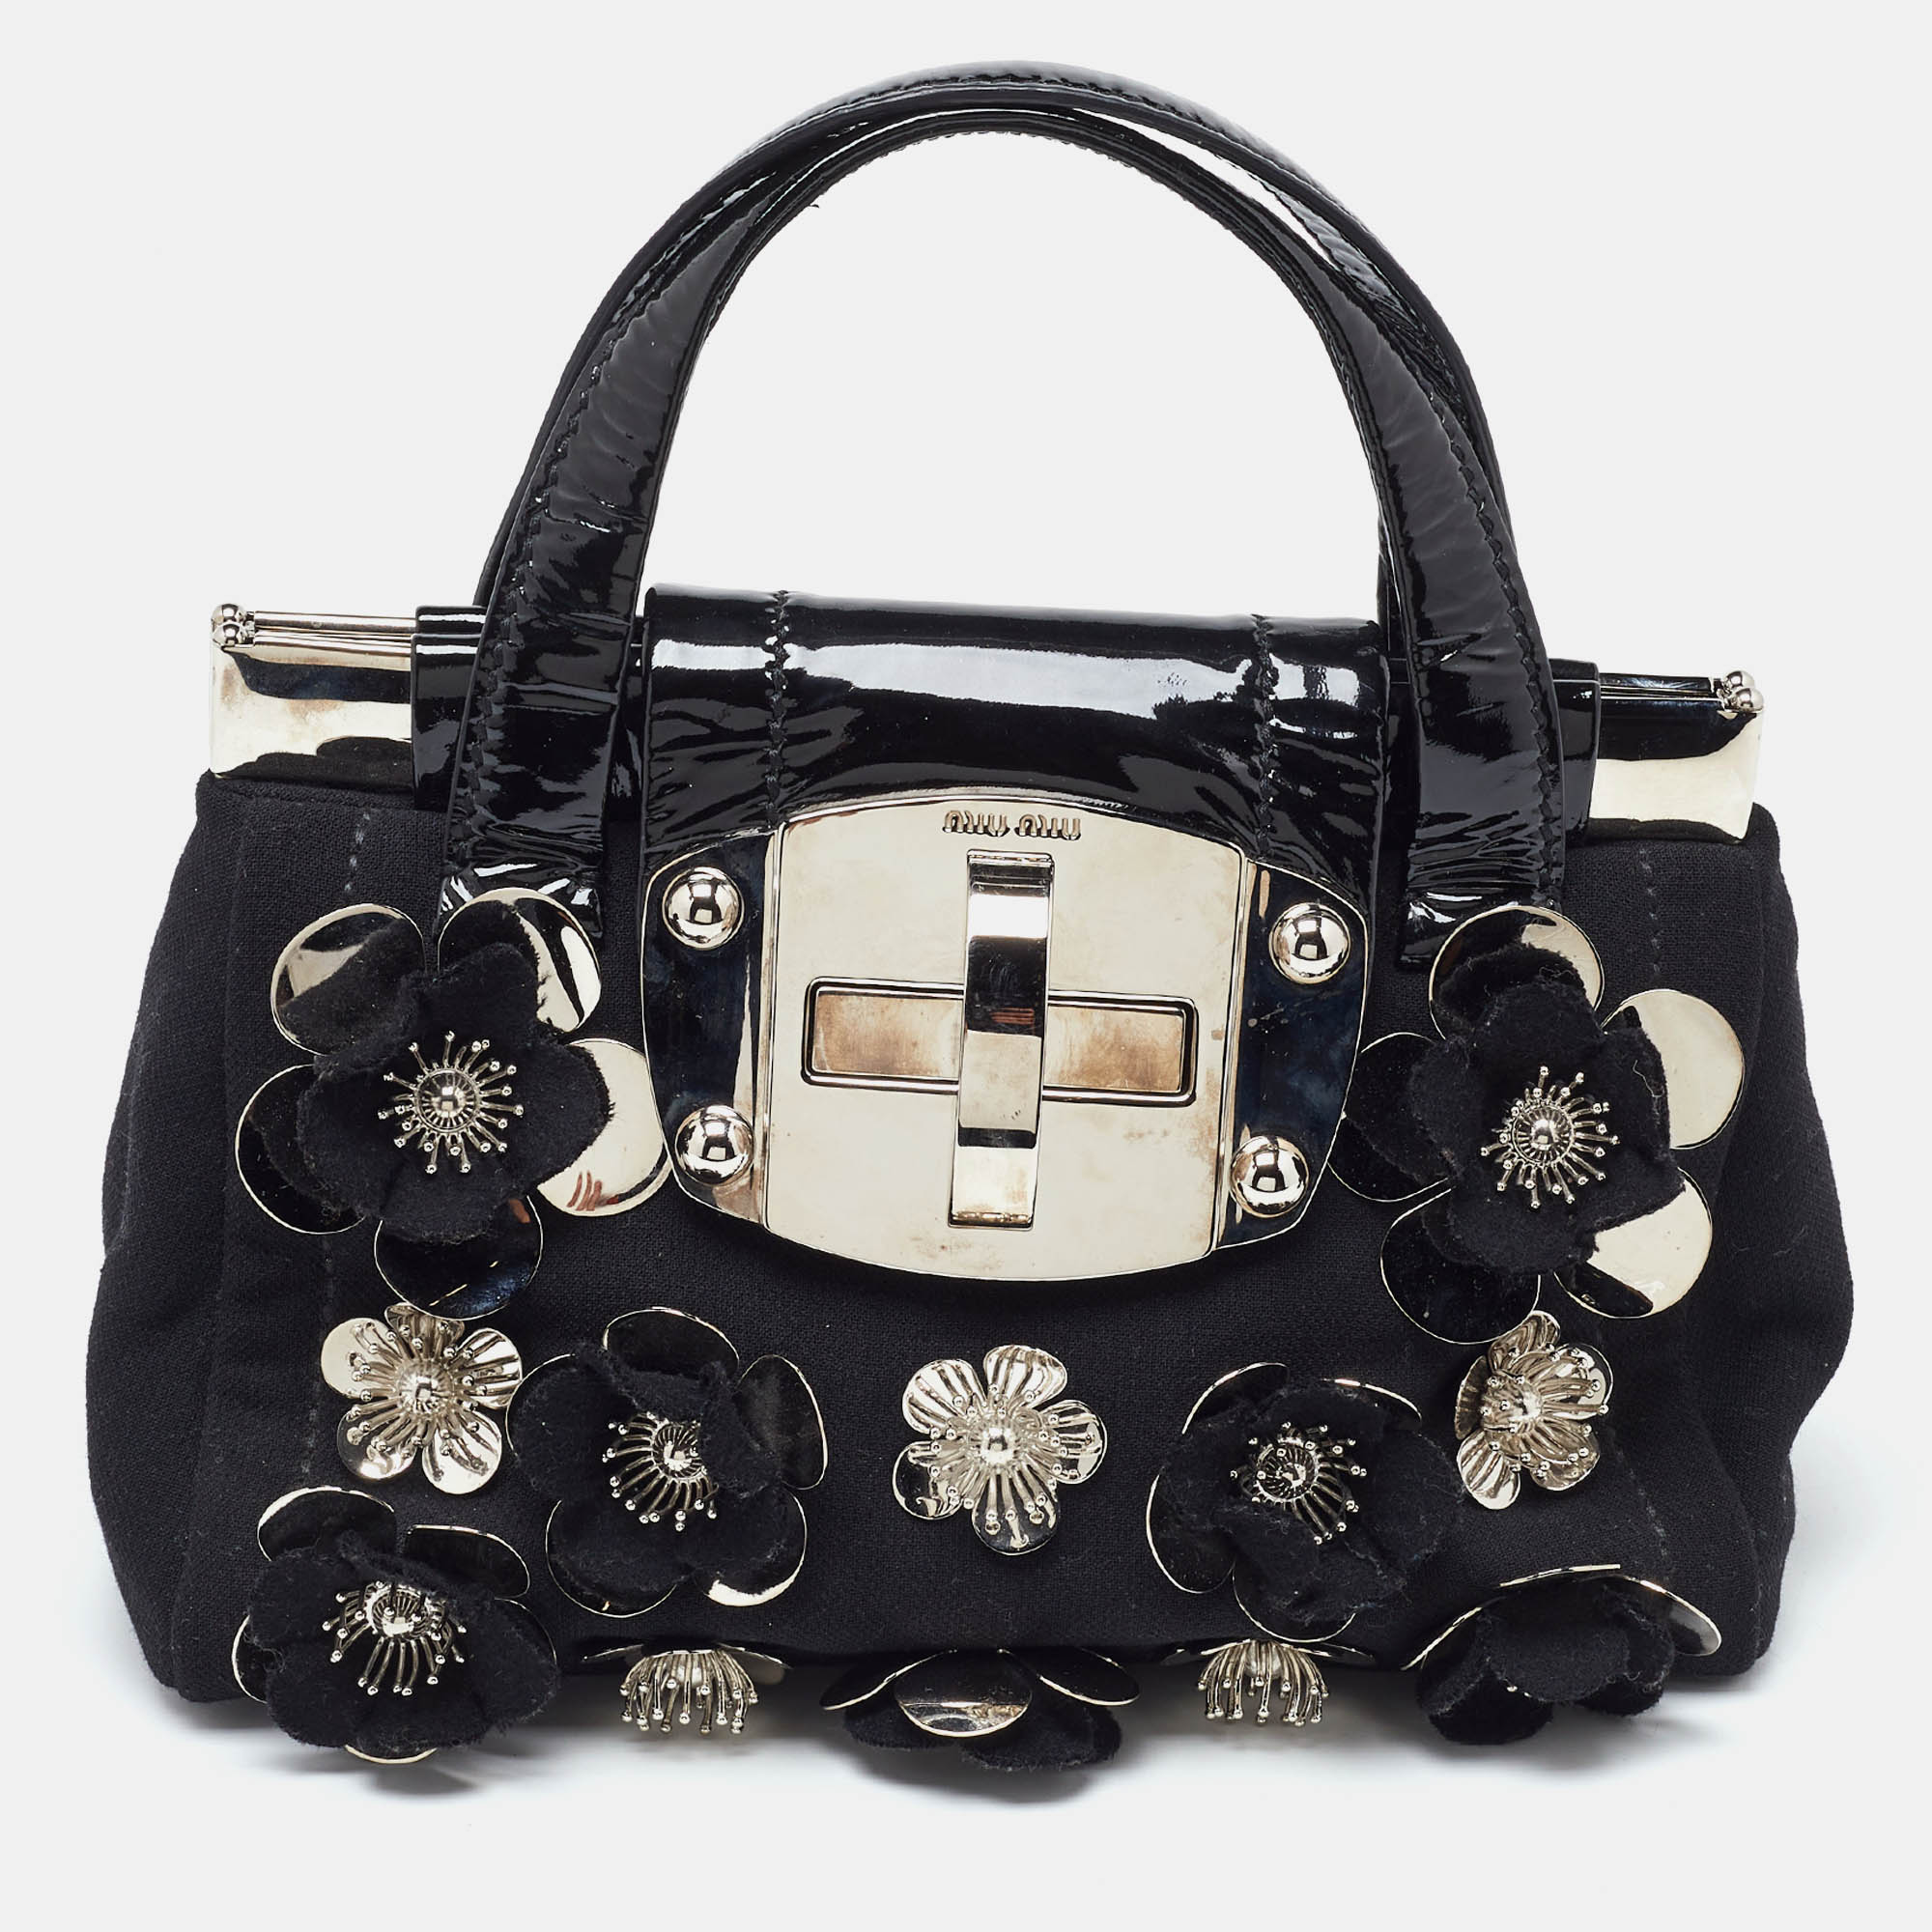 

Miu Miu Black Canvas and Patent Leather Flower Embellished Satchel